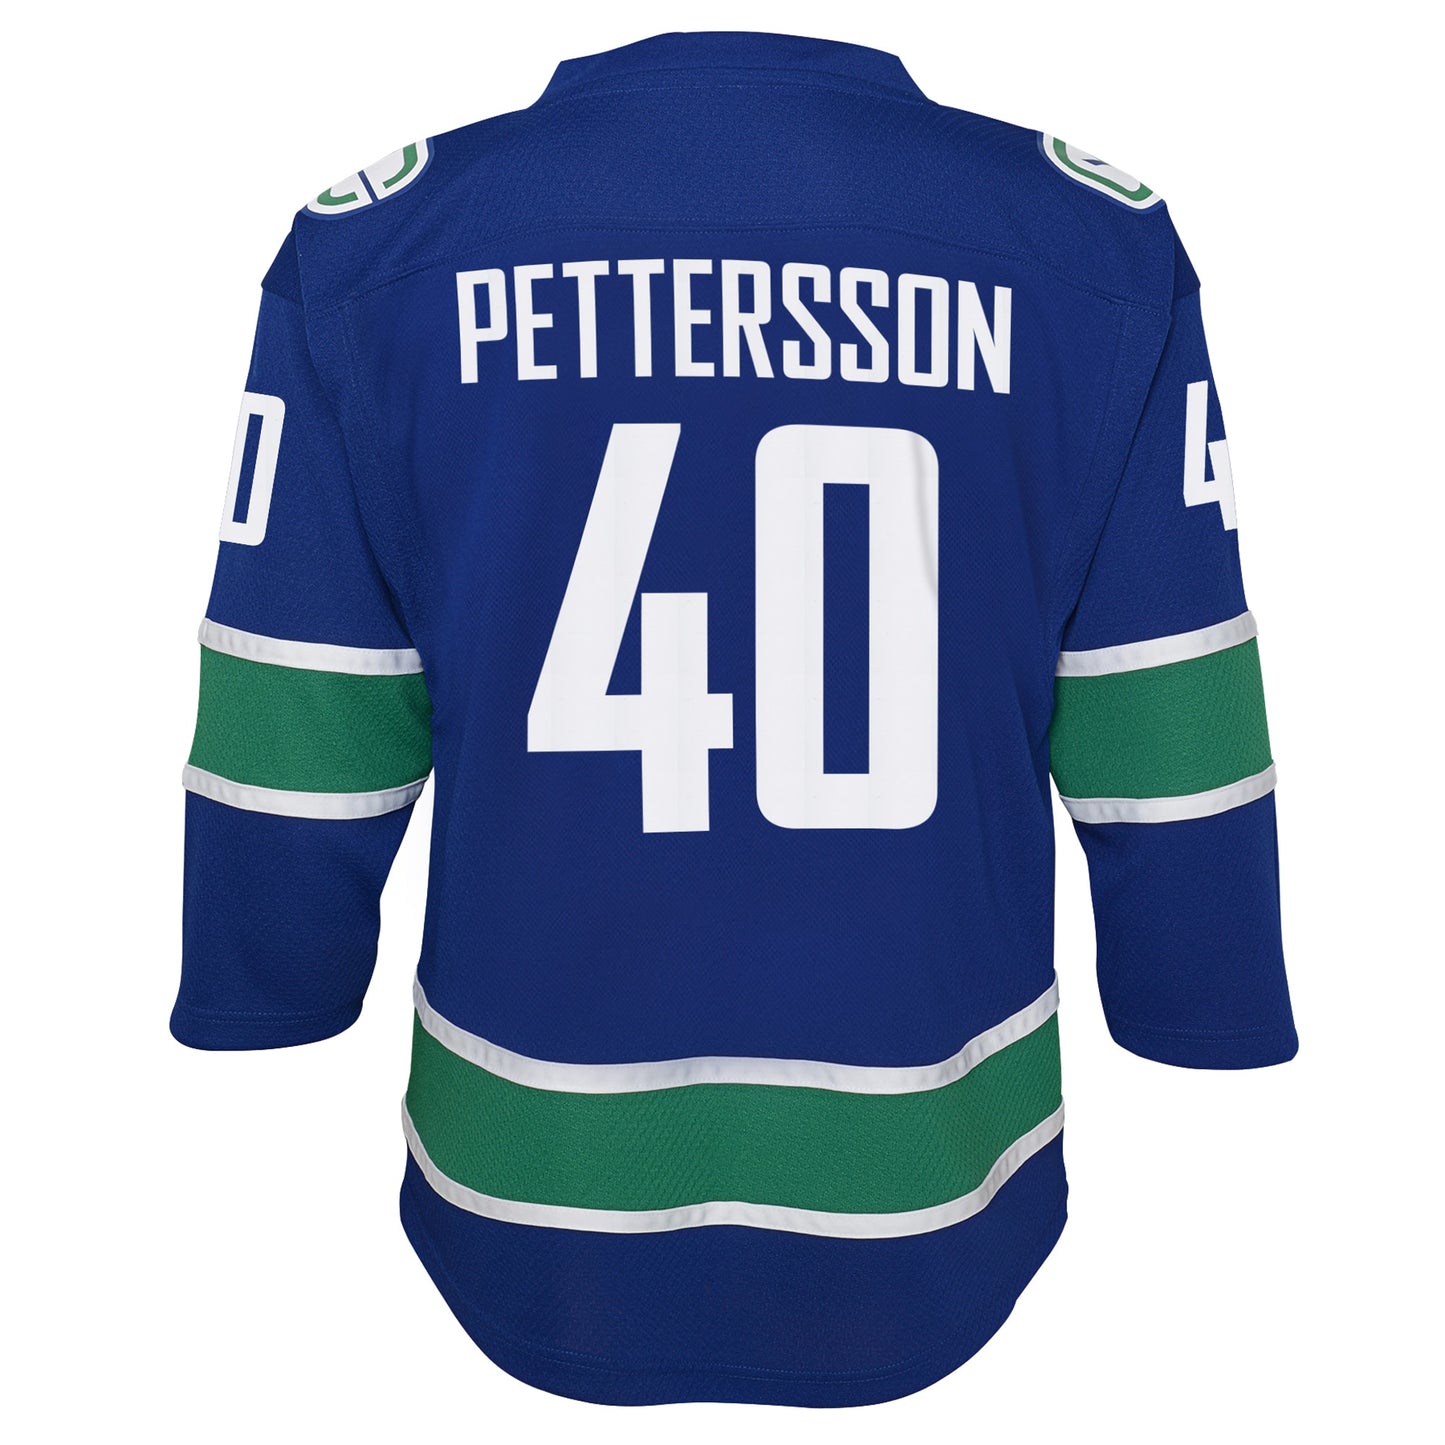 Elias Pettersson Vancouver Canucks Youth 2019/20 Home Replica Player Jersey - Royal